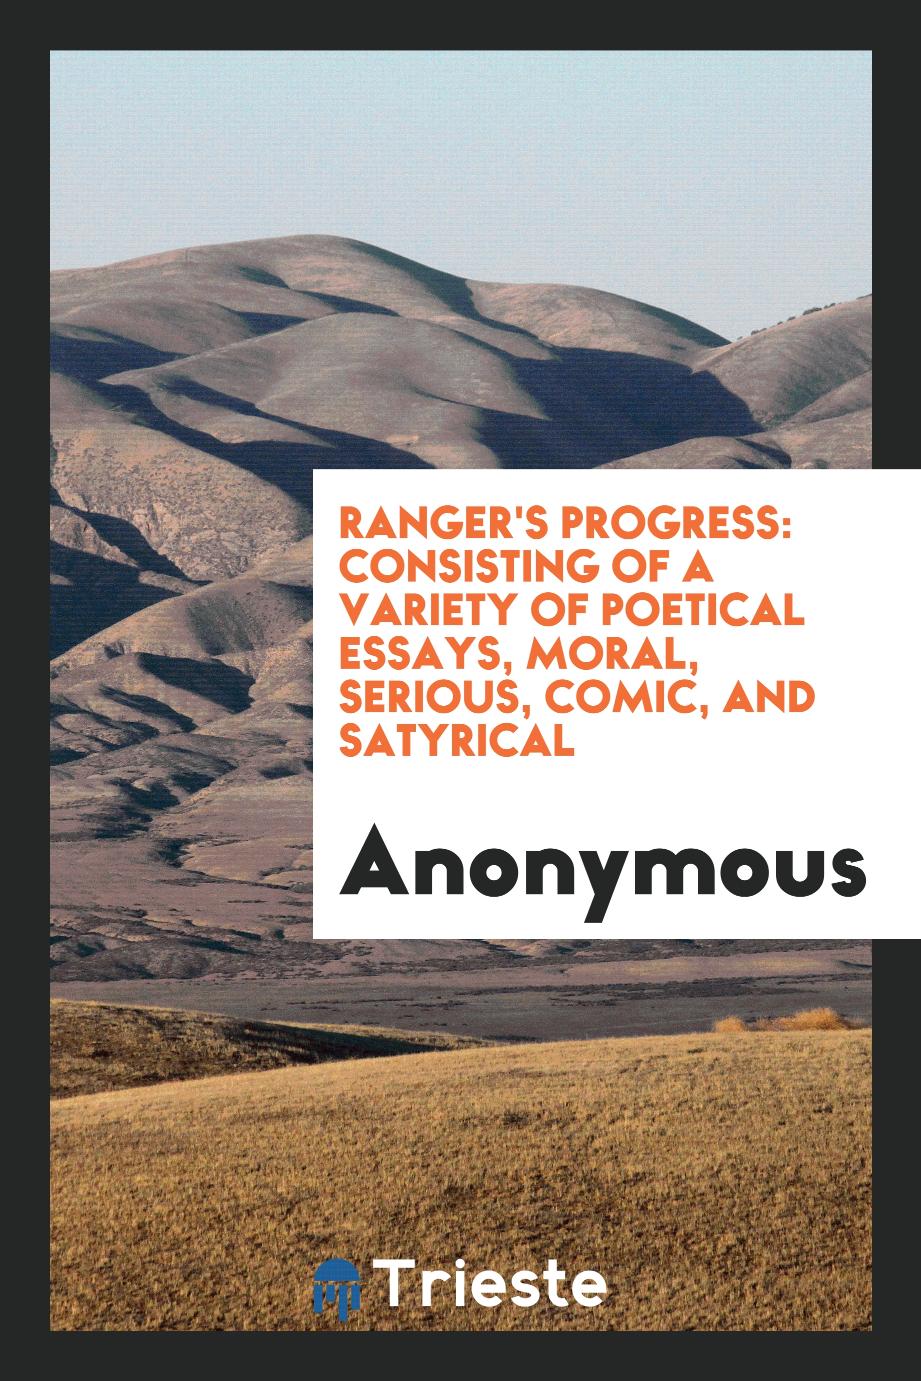 Ranger's Progress: Consisting of a Variety of Poetical Essays, Moral, Serious, Comic, and Satyrical